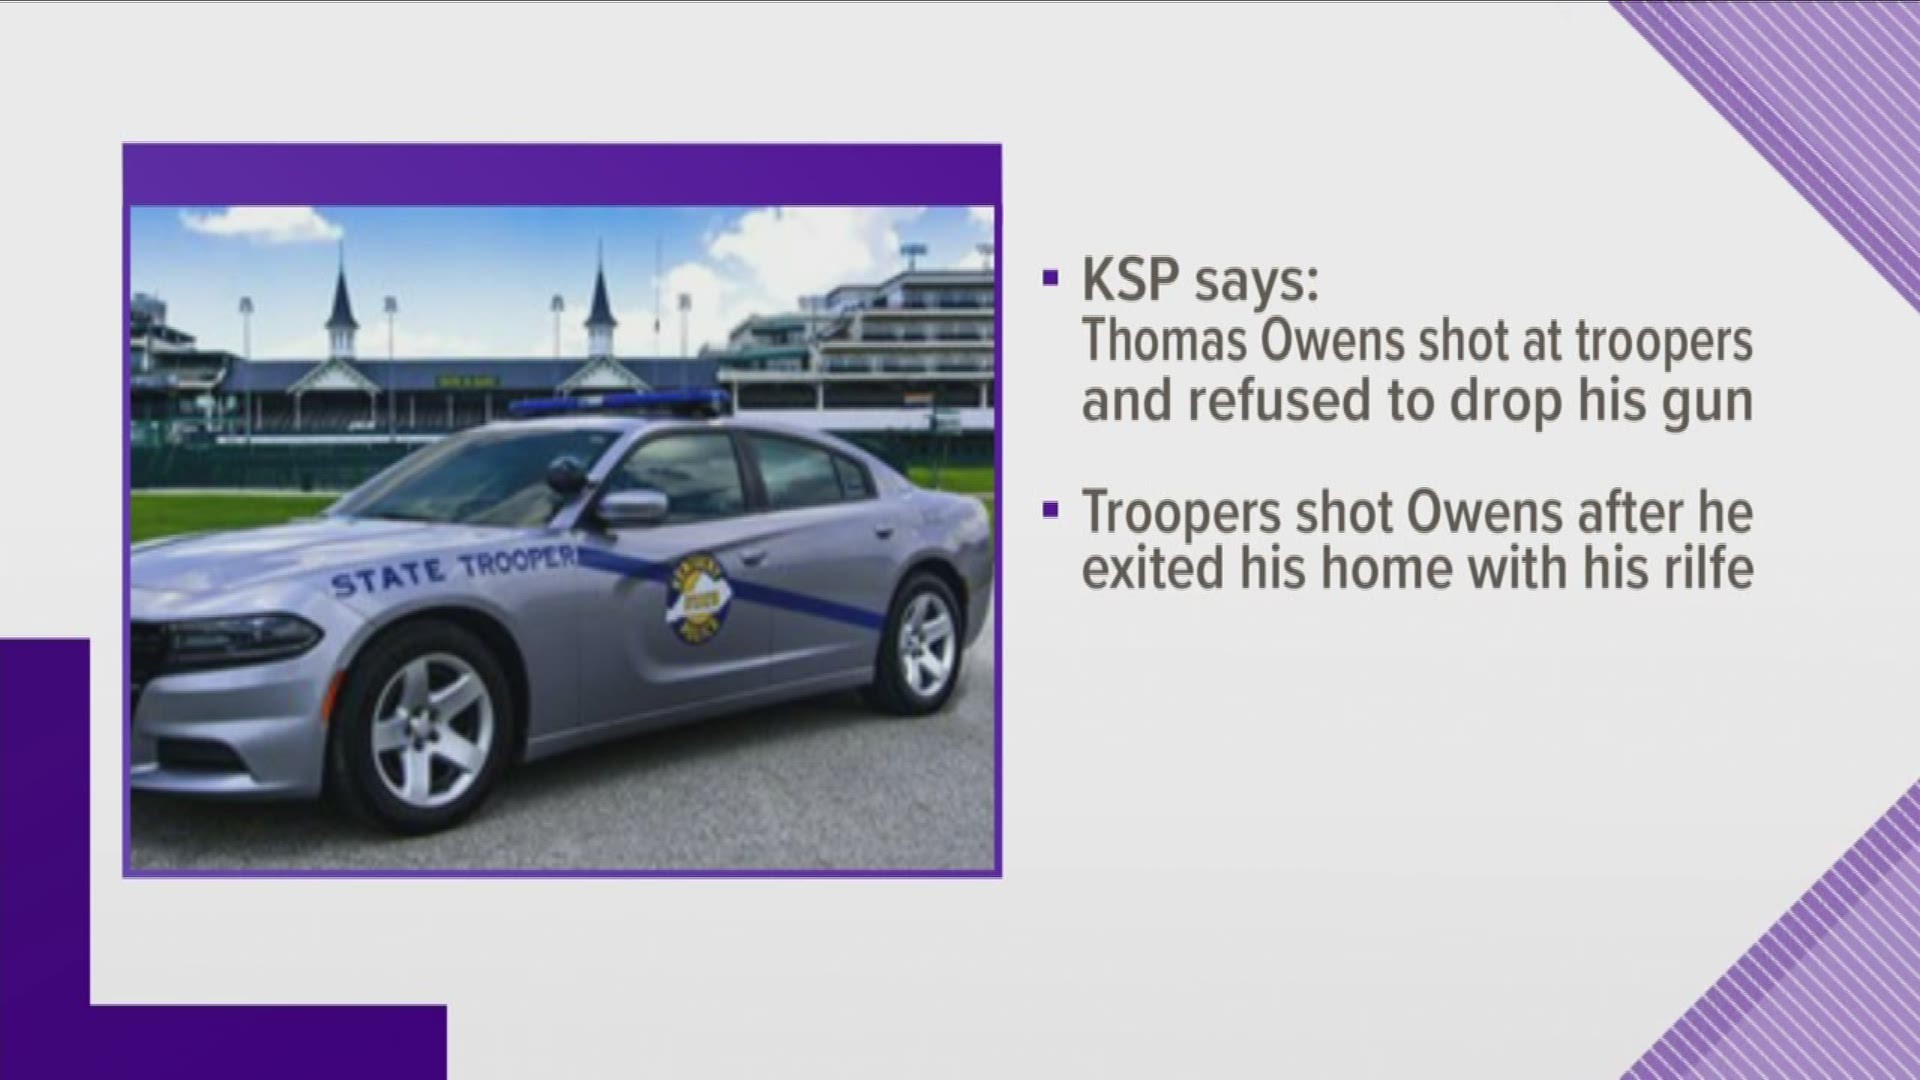 Troopers shot the man after he allegedly shot at troopers, refused to drop the gun, then exited his home with a rifle.